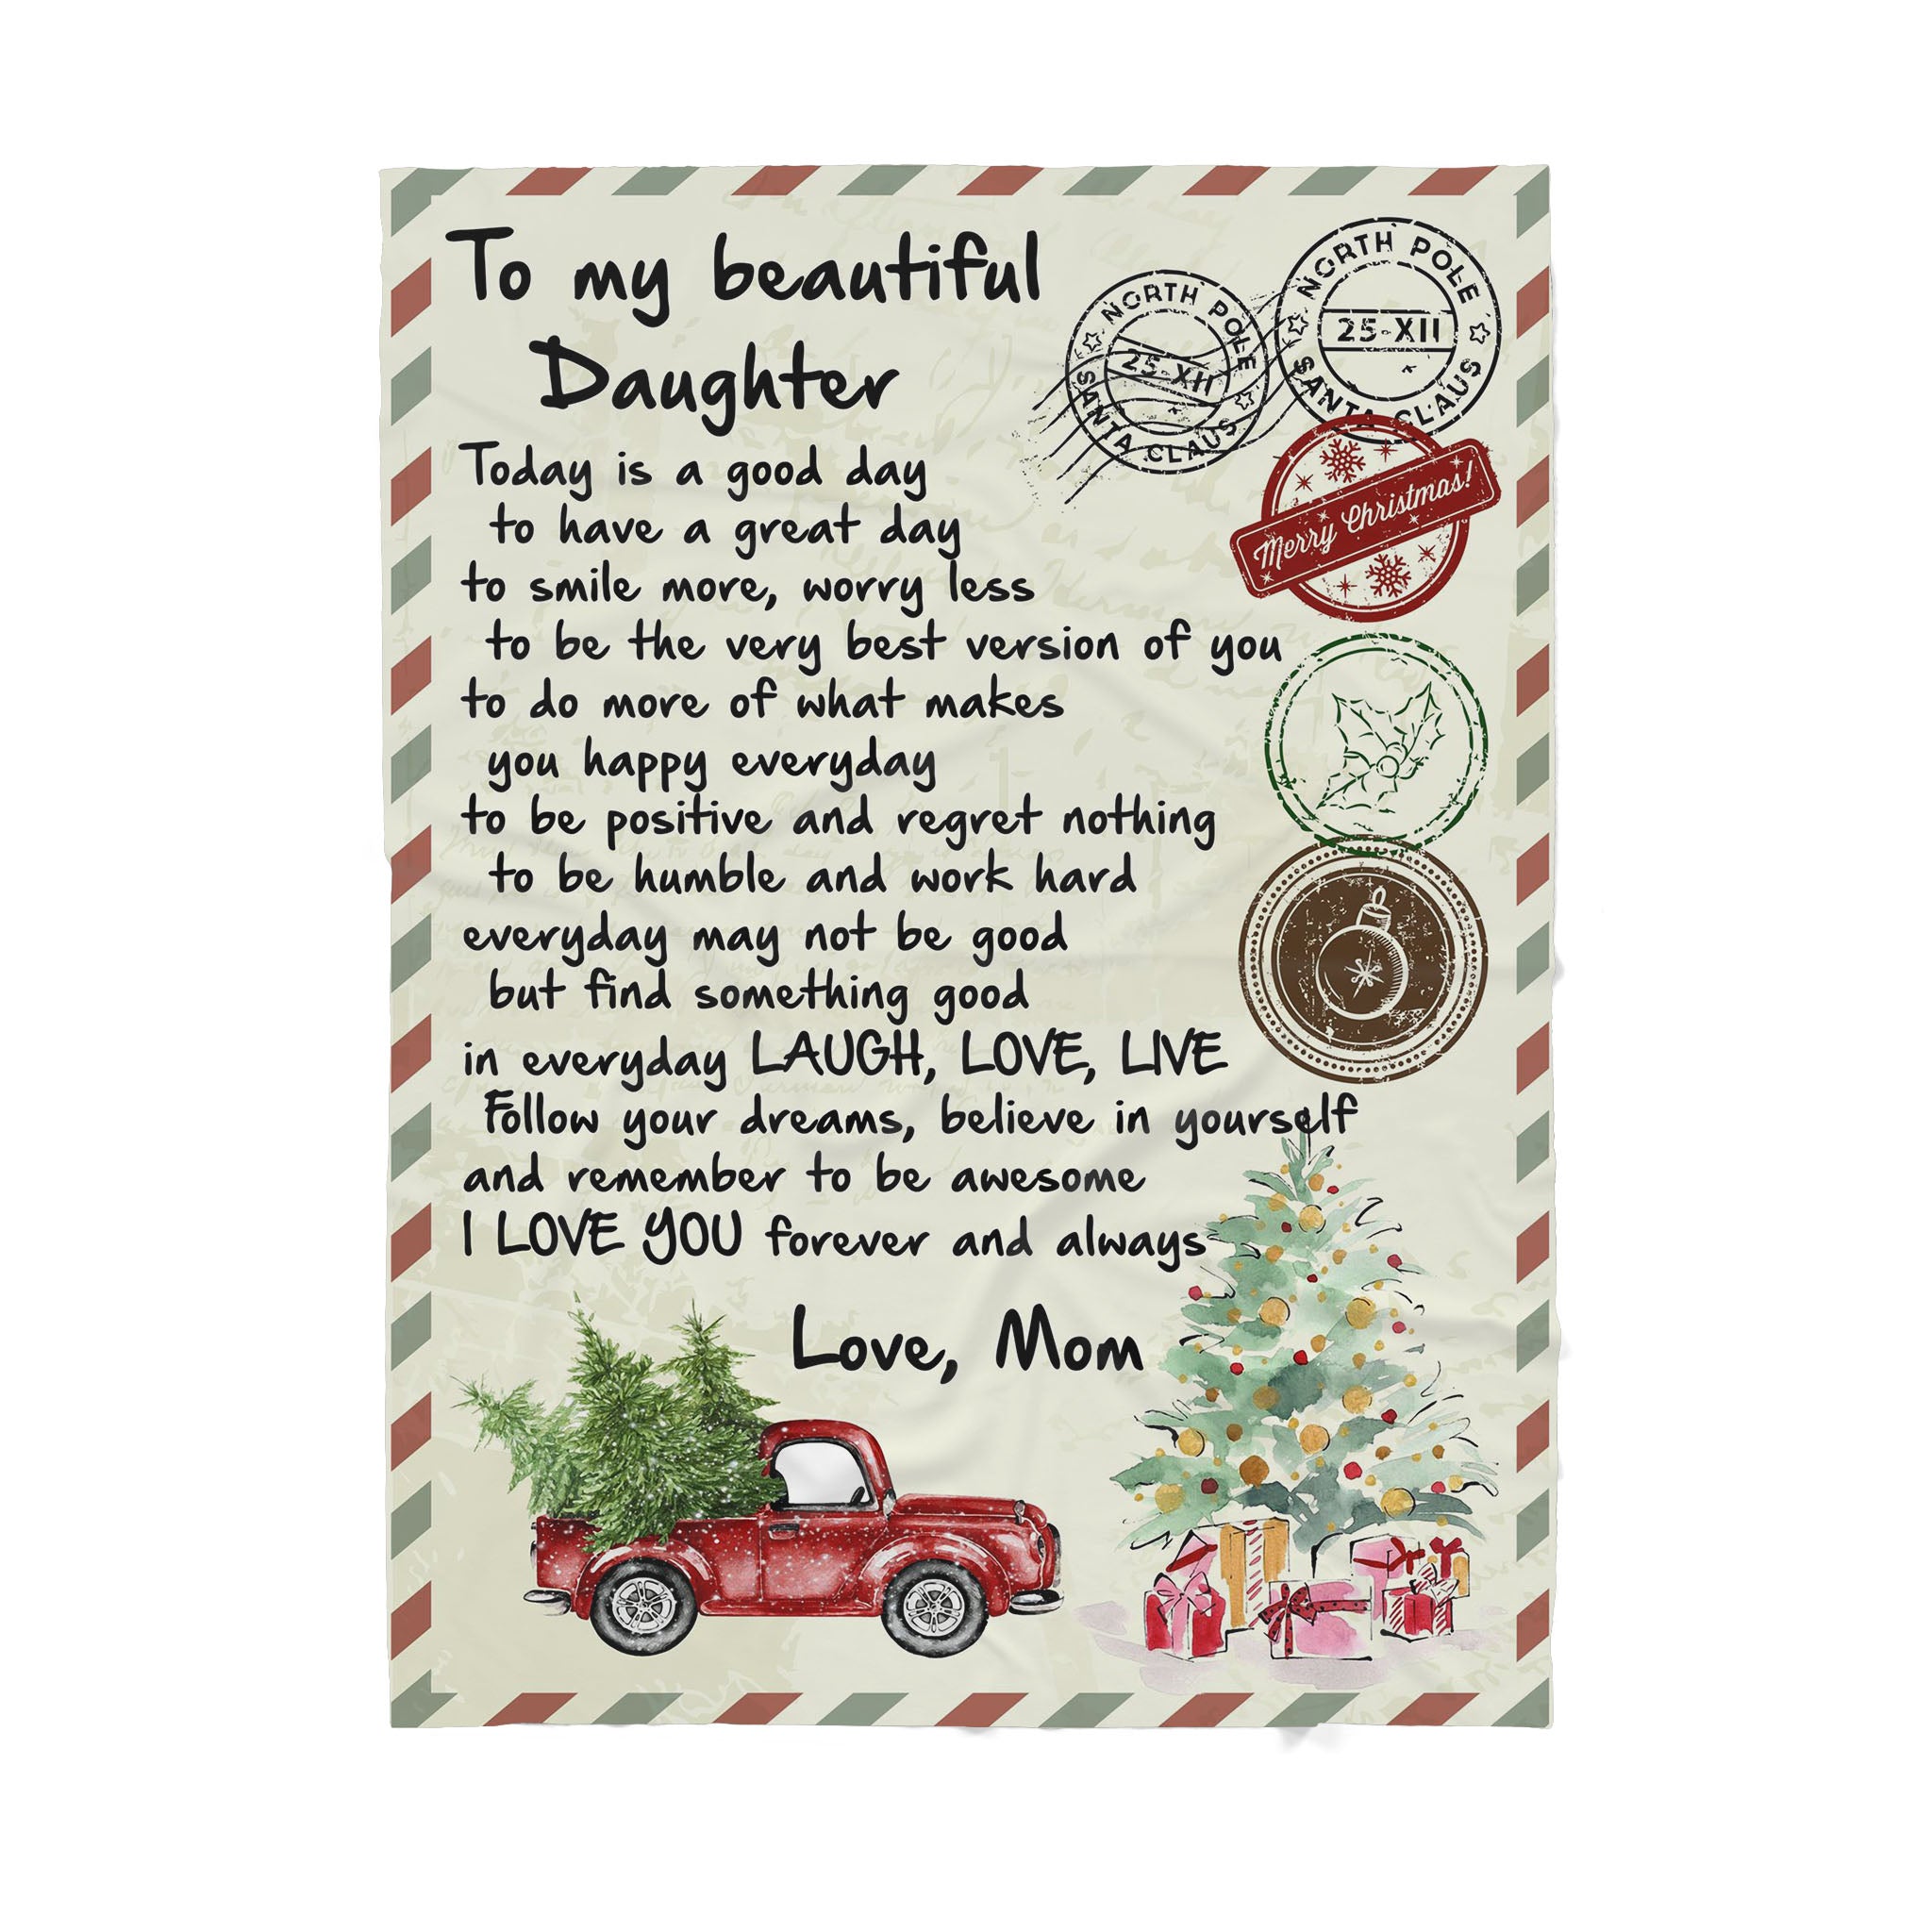 Blanket Gifts For Adult Daughter, Sentimental Gifts For Daughter